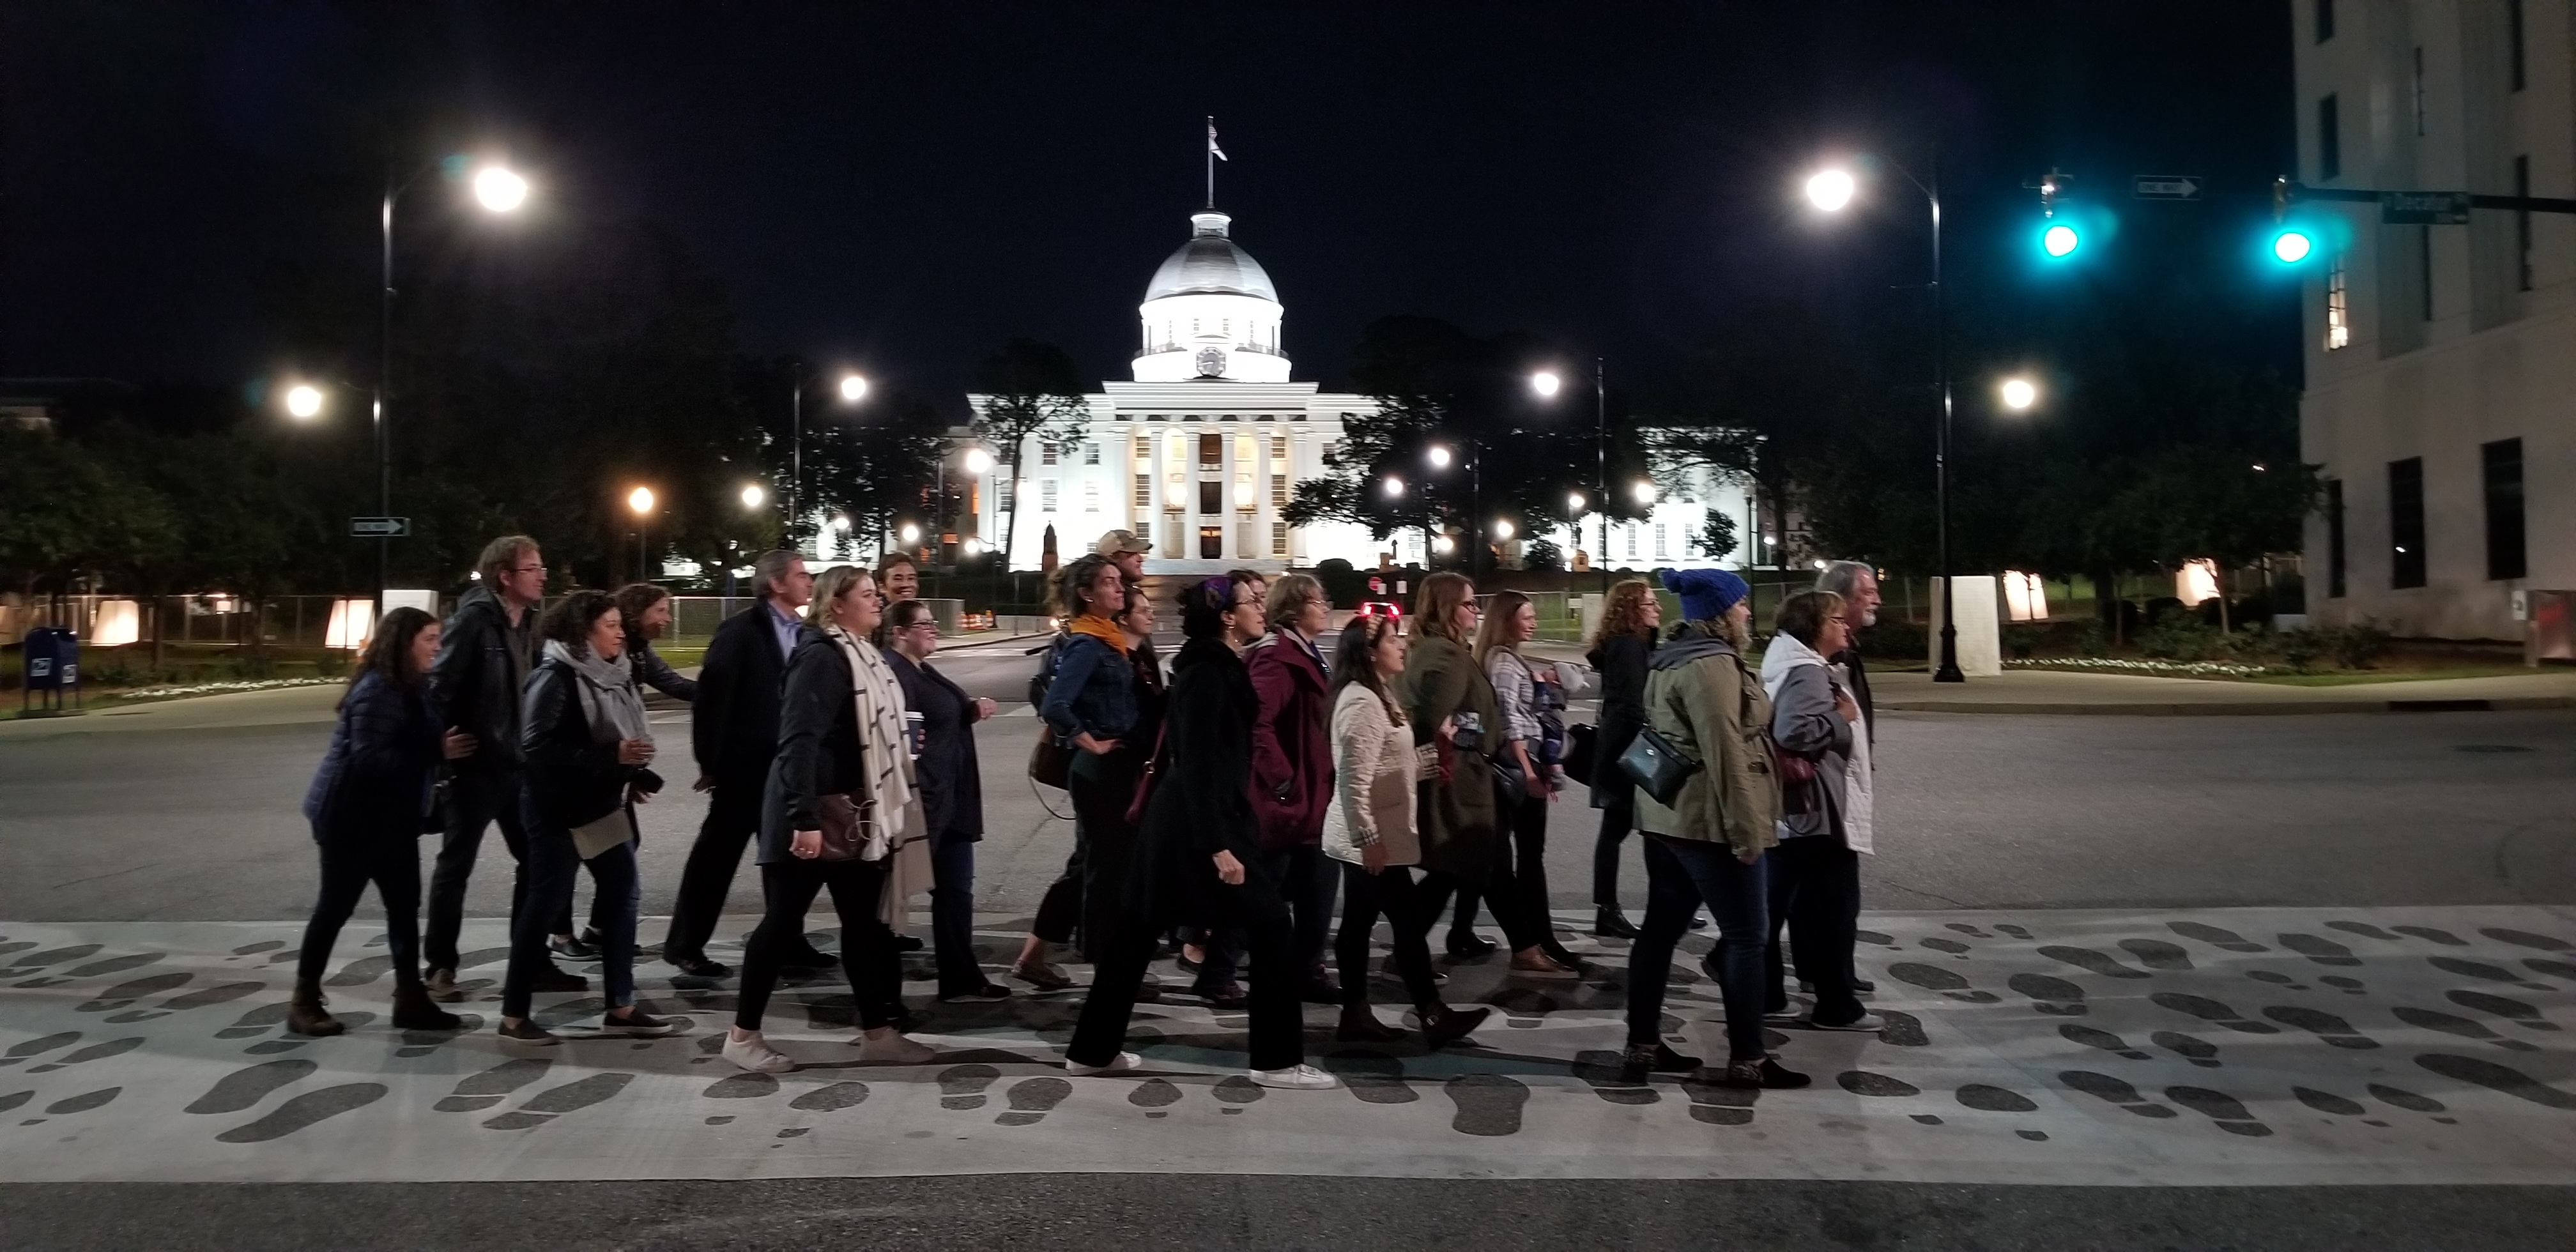 Gilder Lehrman Institute staff in front of the Montgomery capitol building, stepping on footprints marking the 50th Anniversary of the Selma to Montgomery March